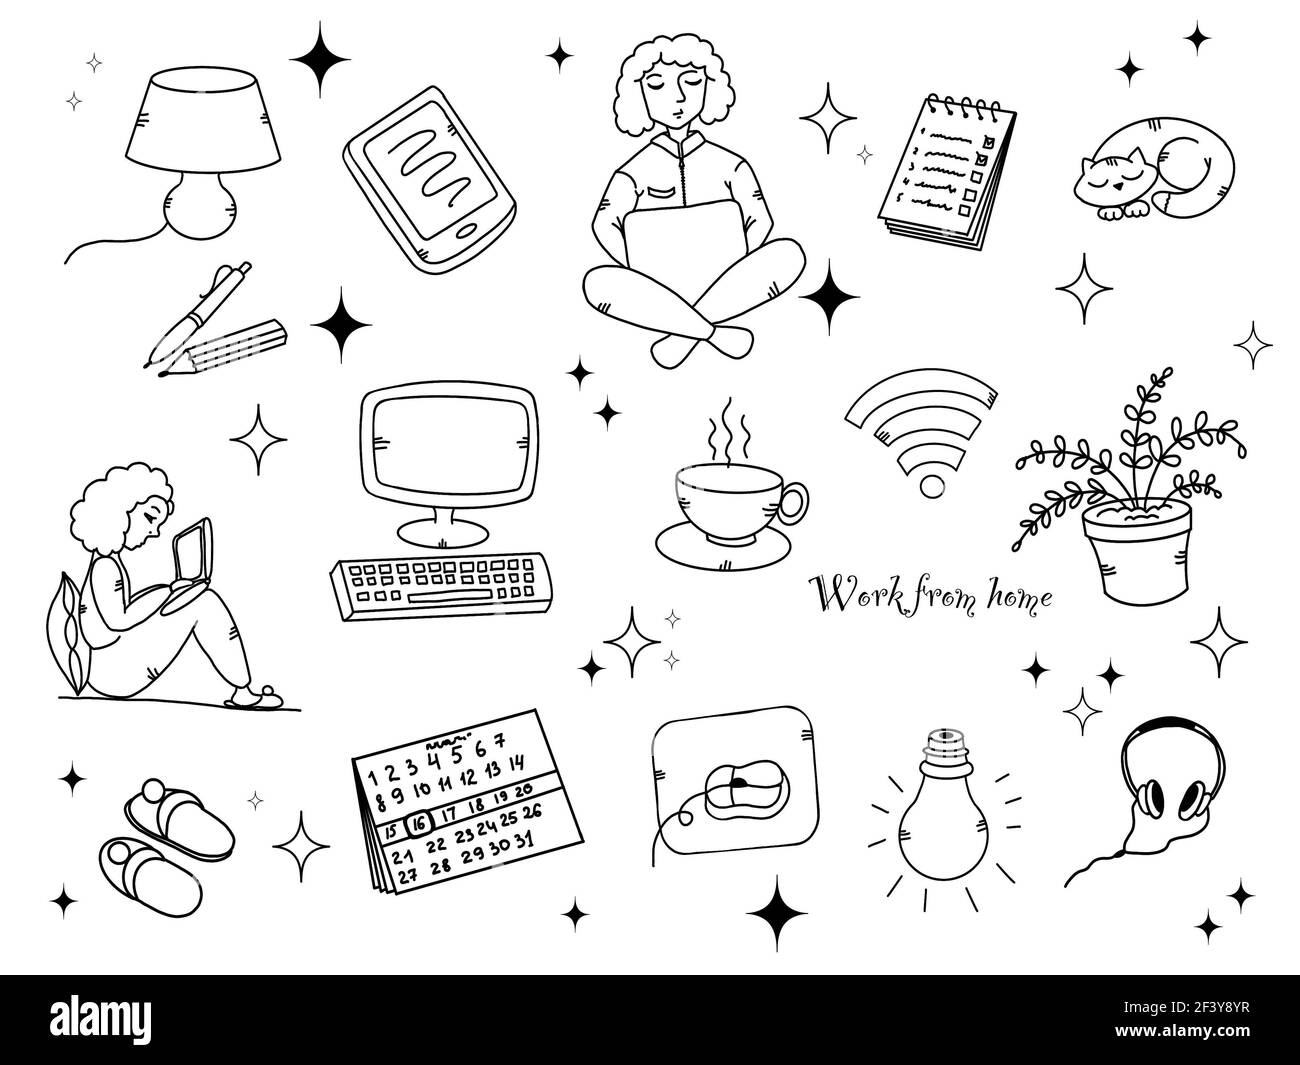 An illustration of doodles for working from home, computer, cat, a girl behind a laptop, and more Stock Photo